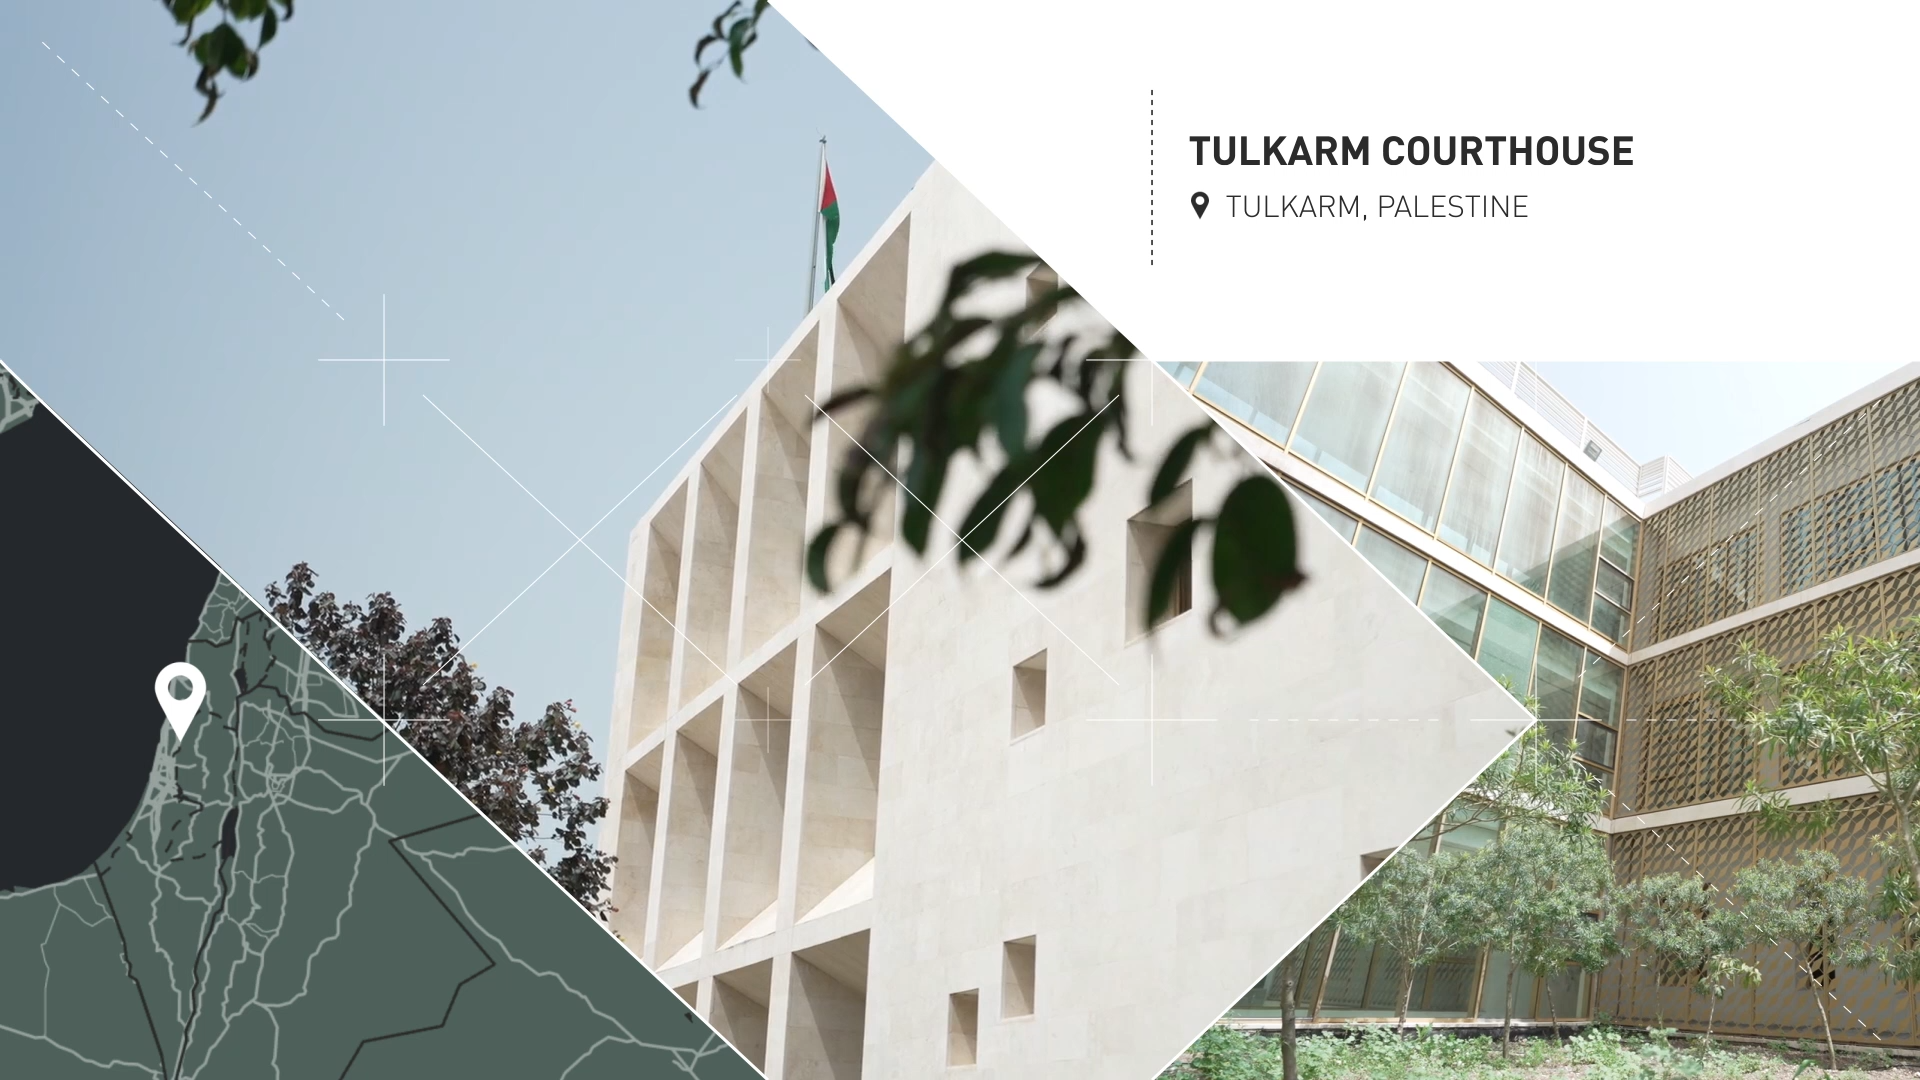 <p>Tulkarm Courthouse,&nbsp;Tulkarm, Palestine, by AAU Anastas: Featuring two buildings, one for administration and the other containing 10 courtrooms, the Courthouse is anchored to its urban context by a public space.</p>